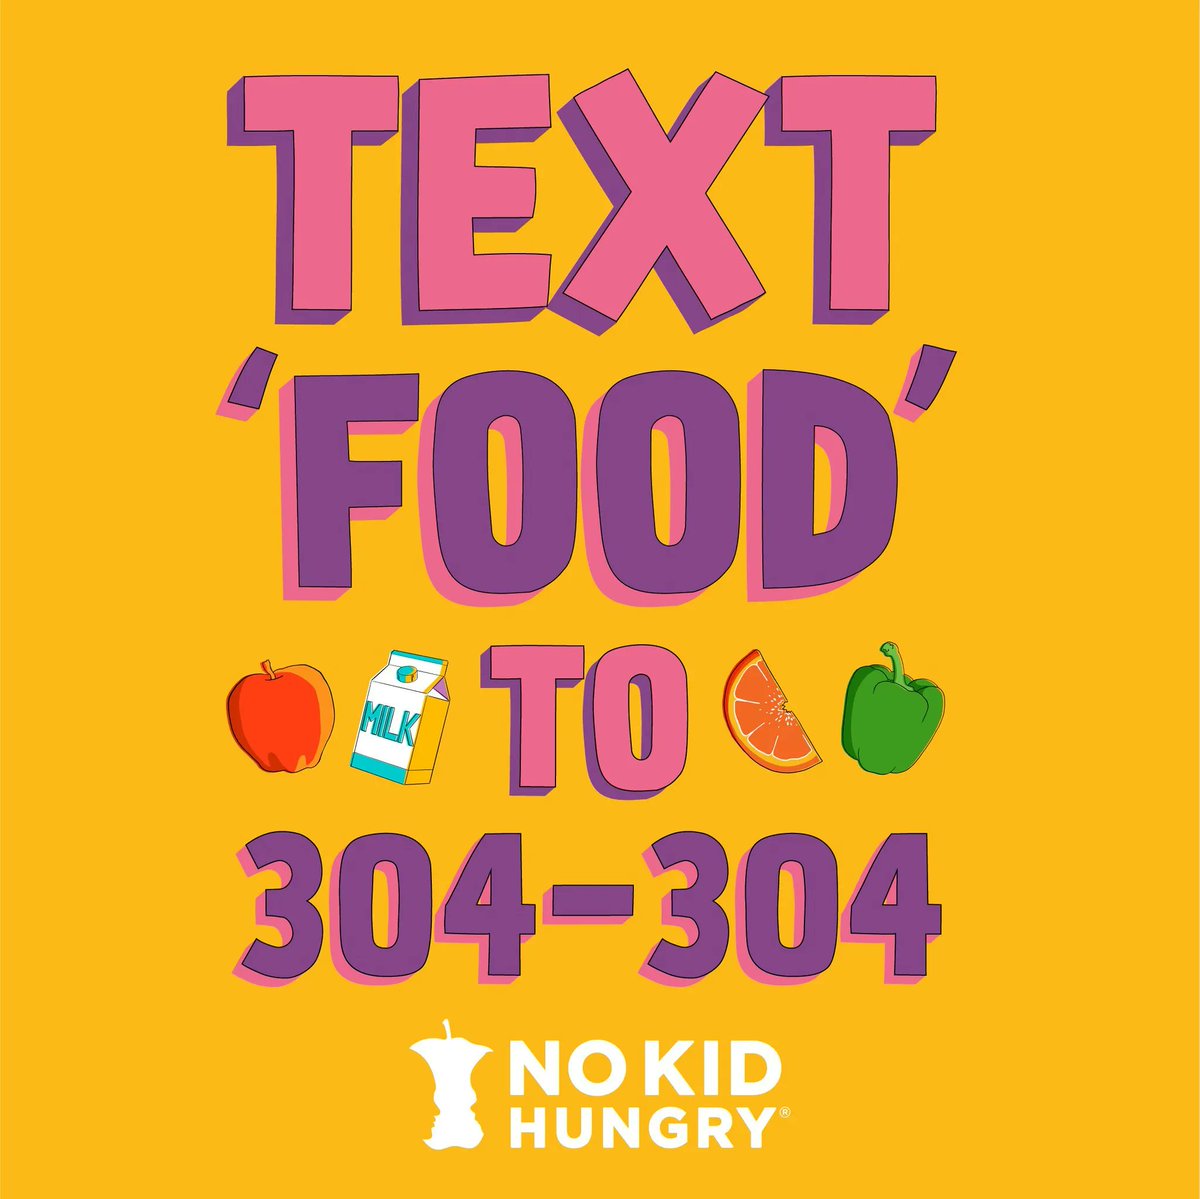 RT @TheJeffBridges  Every kid deserves a healthy + happy summer, so @nokidhungry is helping children get the food they need when school is out. #ShareSummer through their Free Meal Finder: buff.ly/43Ubqu4